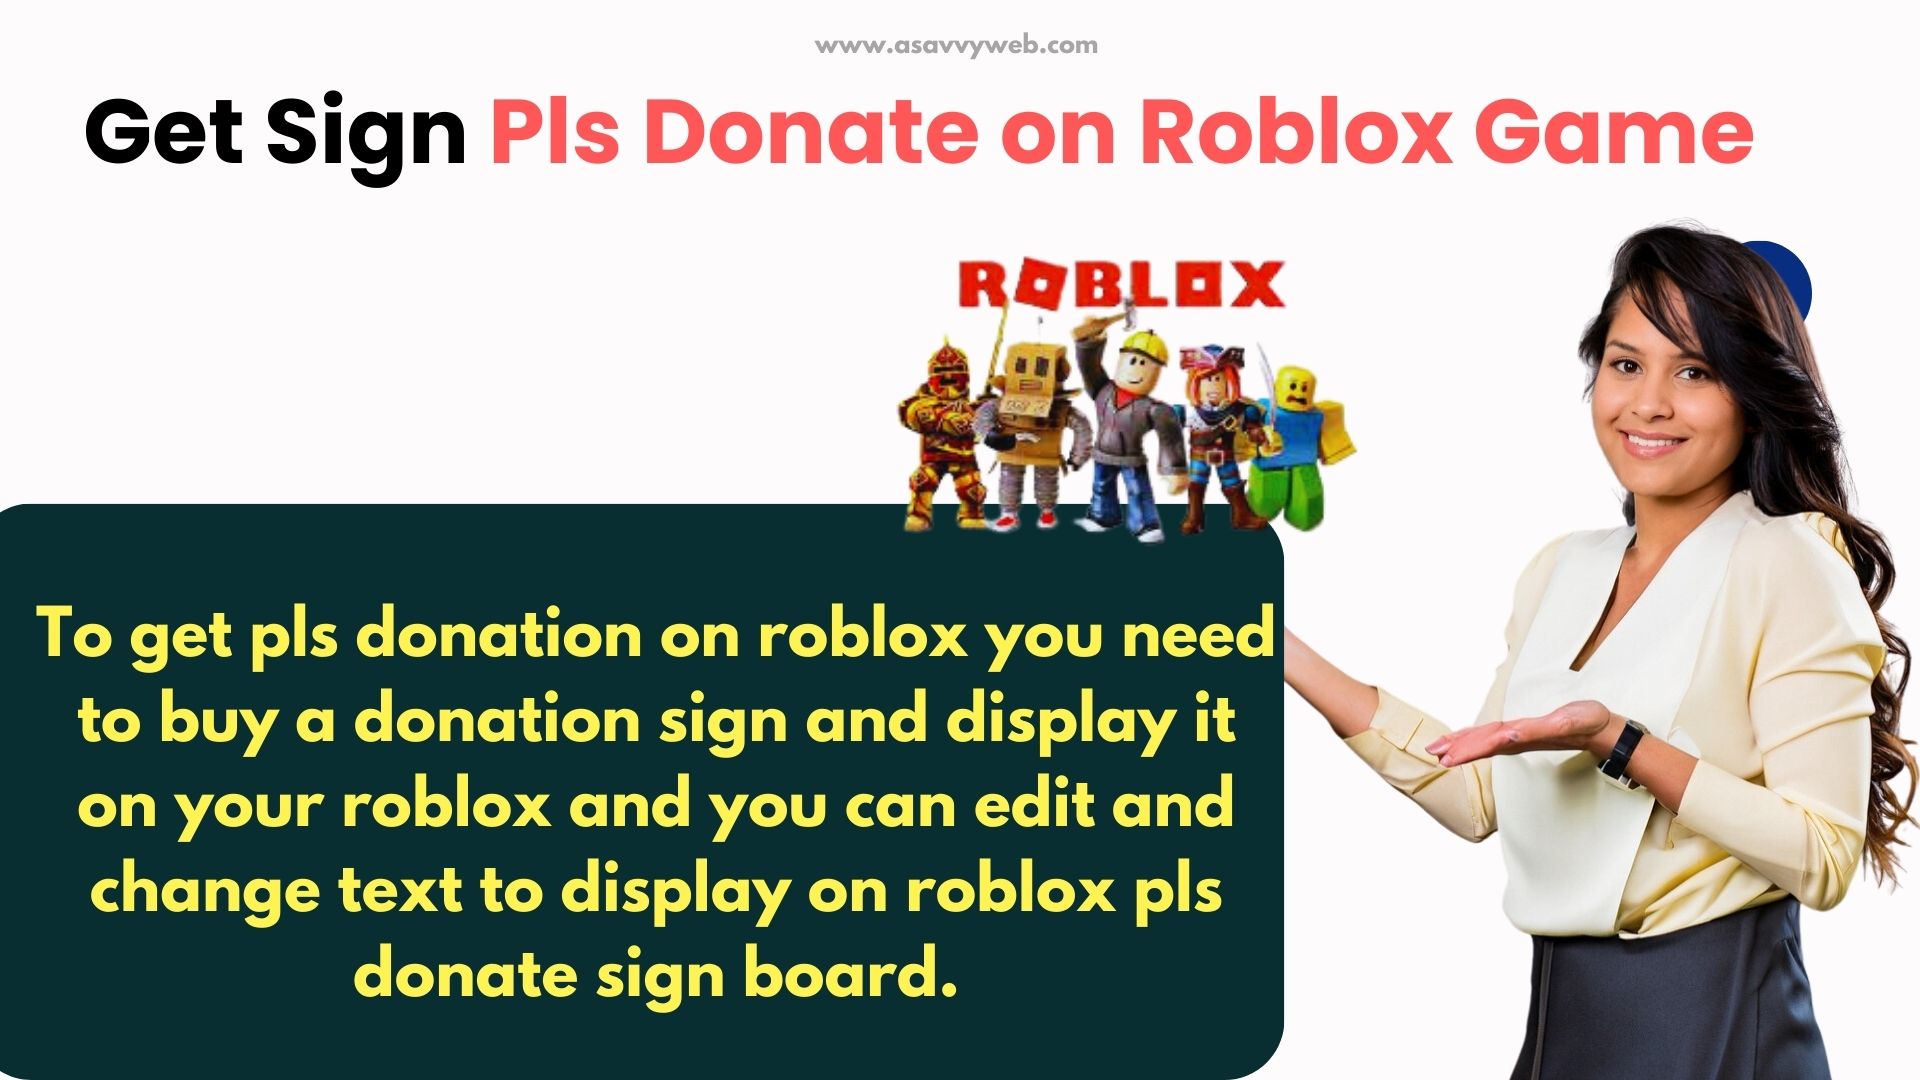 NEW* ALL WORKING CODES FOR PLS DONATE IN JUNE 2023! ROBLOX PLS DONATE CODES  